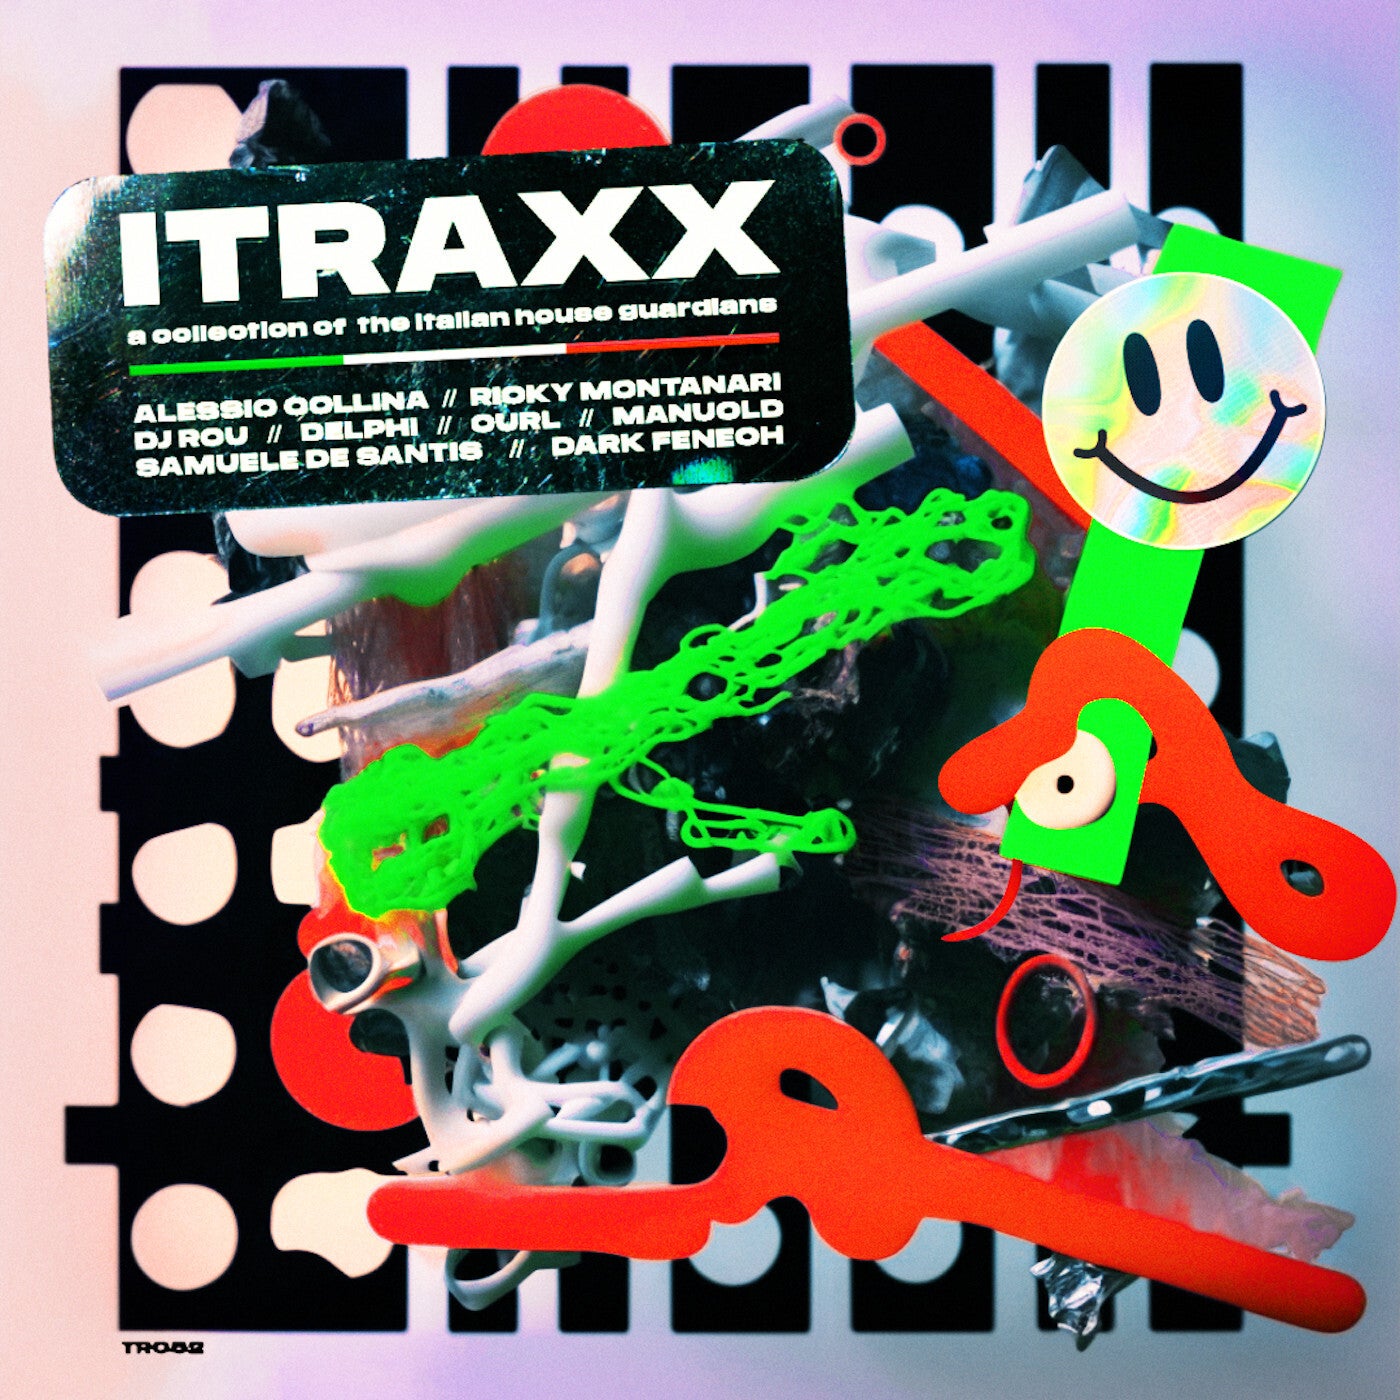 Alessio Collina, Dj Rou – ITRAXX – A collection of Italian House guardians [TR052]